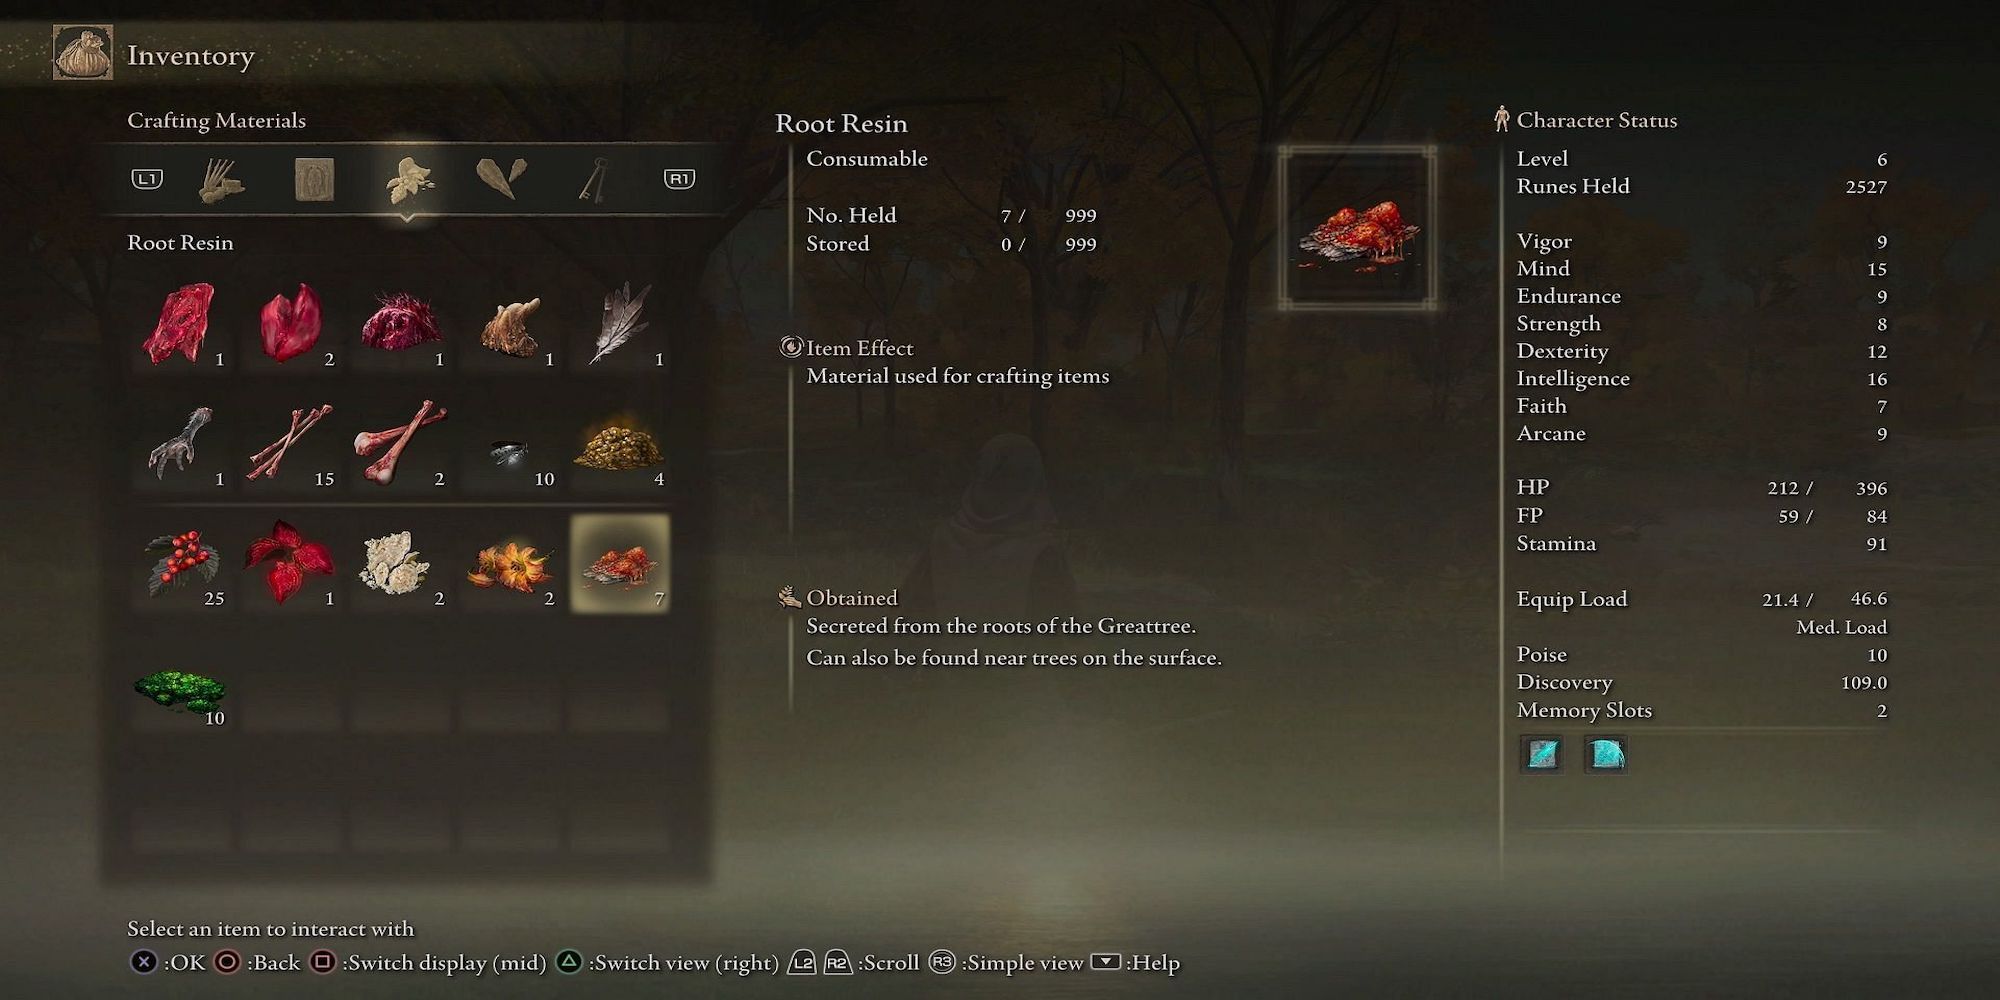 Elden Ring's Inventory screen with the item Root Resin selected